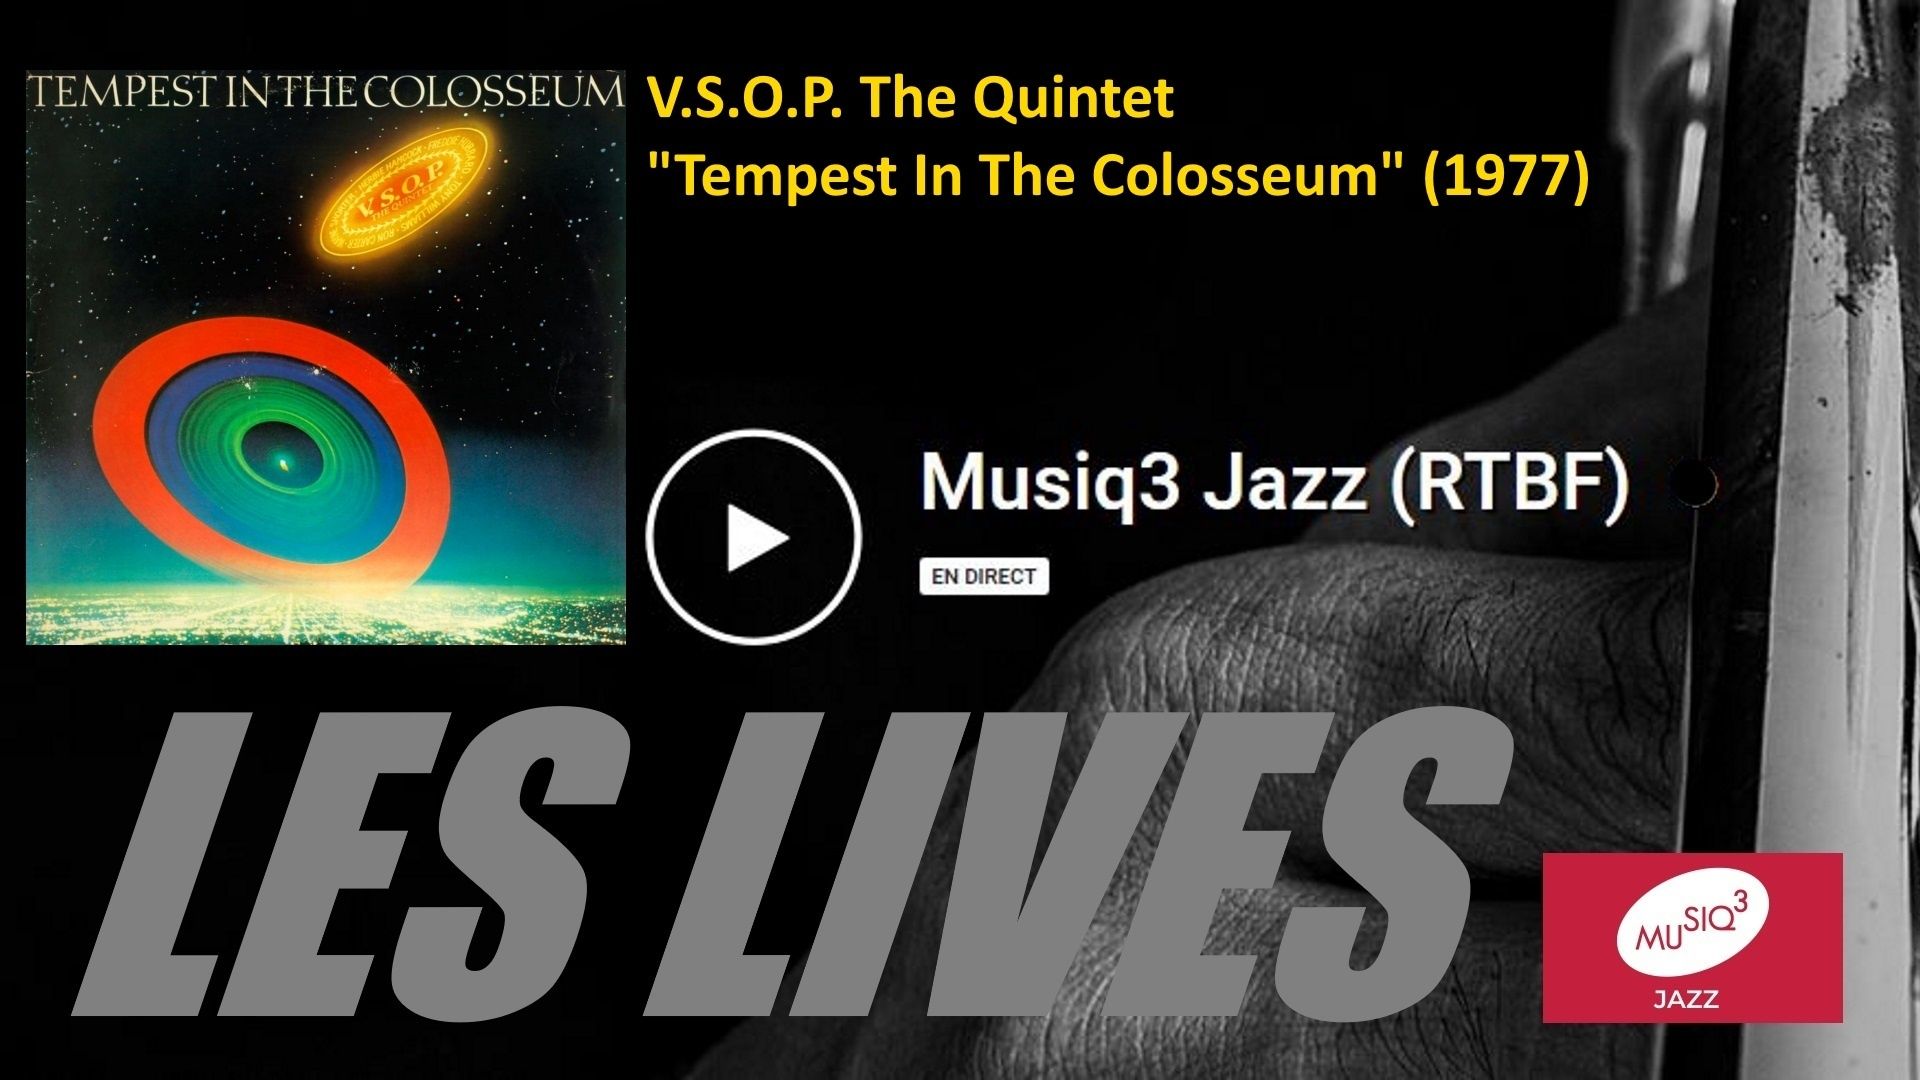 Les lives : V.S.O.P. The Quintet : ("Tempest In The Colosseum", 1977)